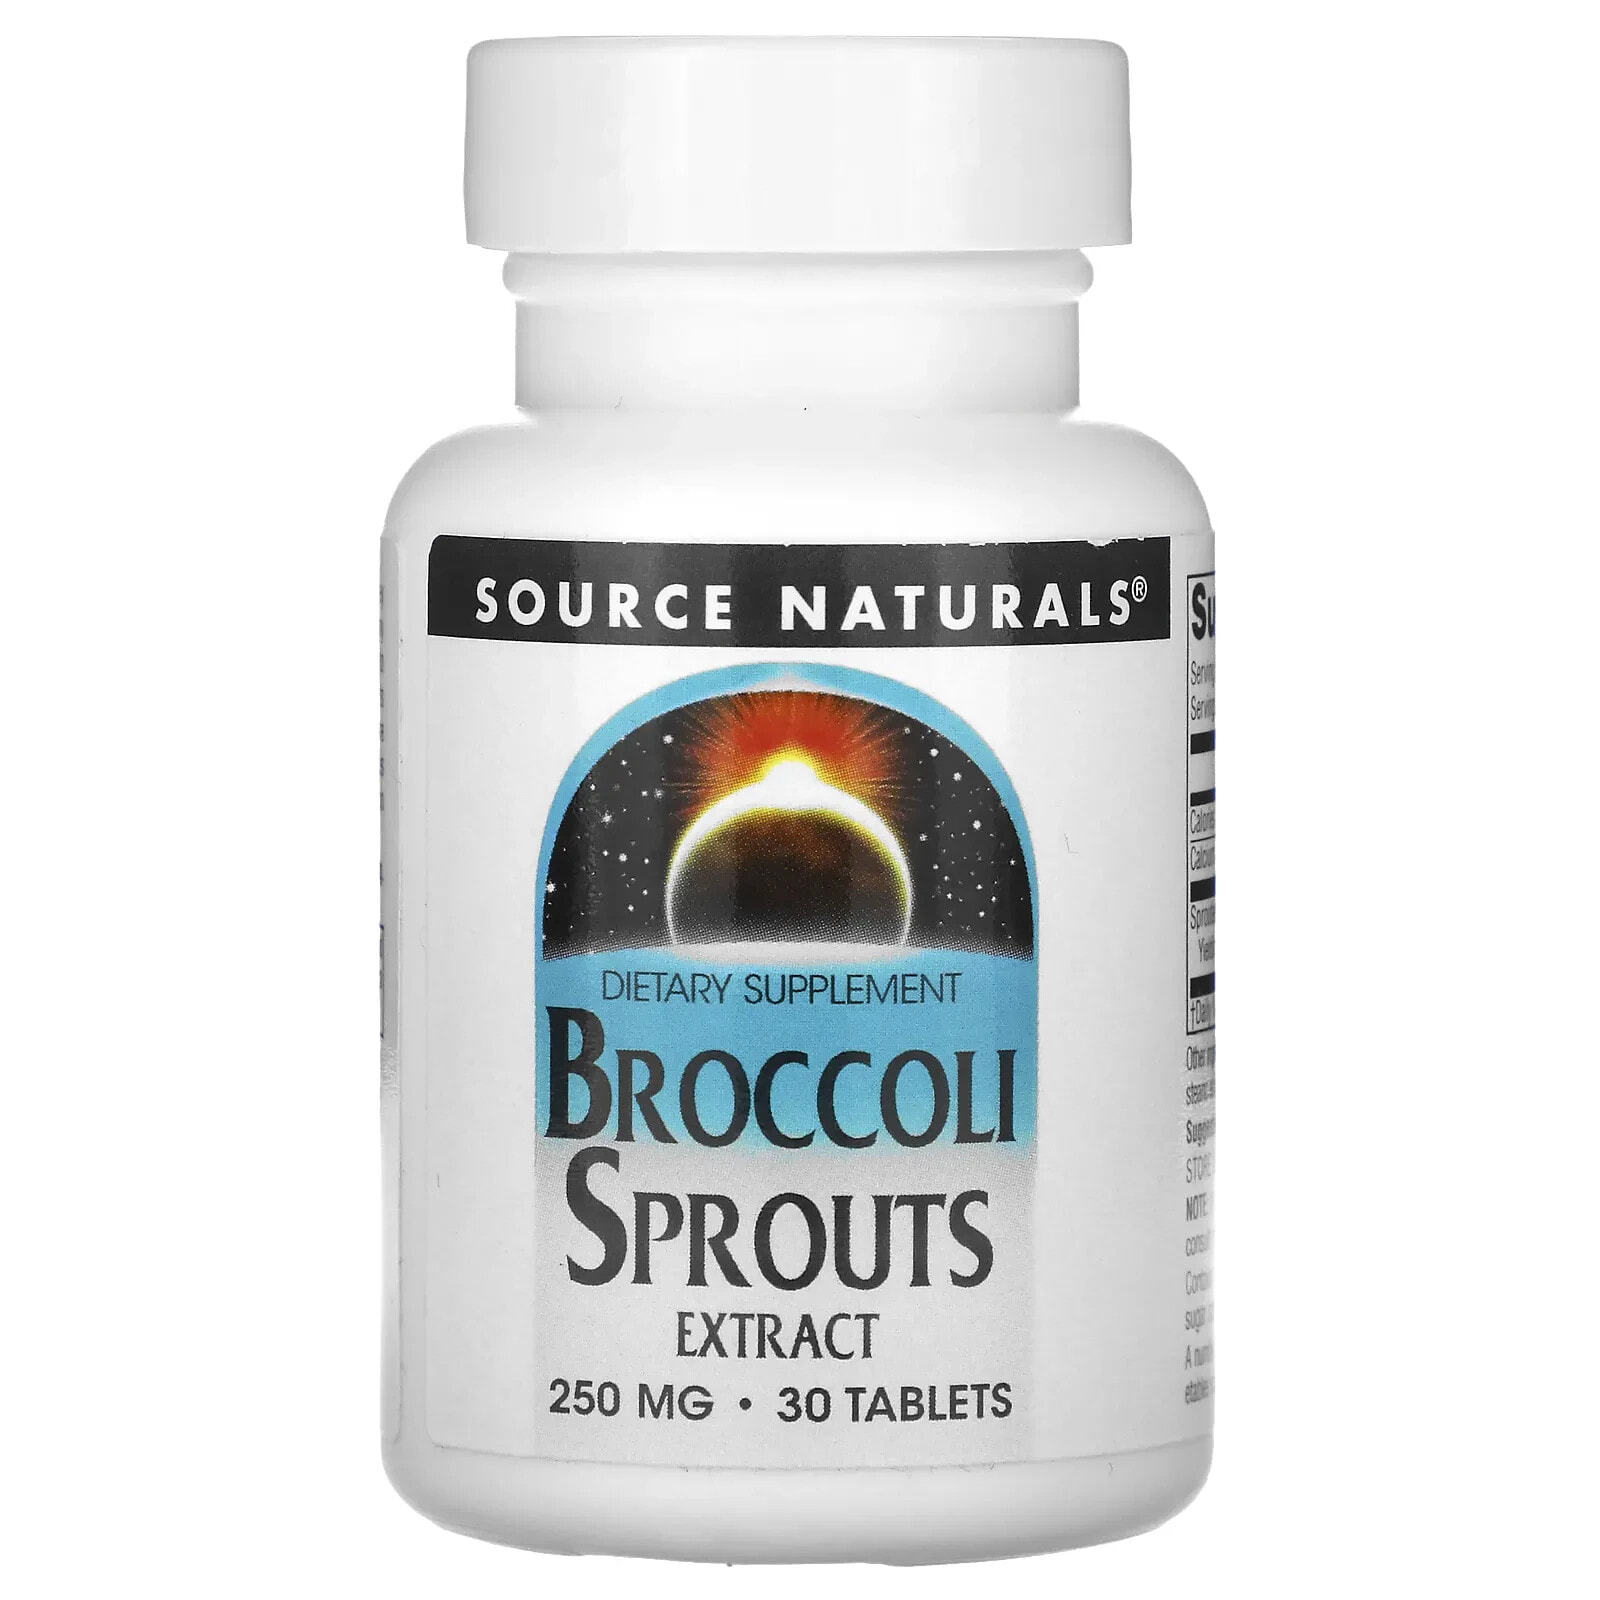 Broccoli Sprouts Extract, 500 mg, 30 Tablets (250 mg per Tablet)